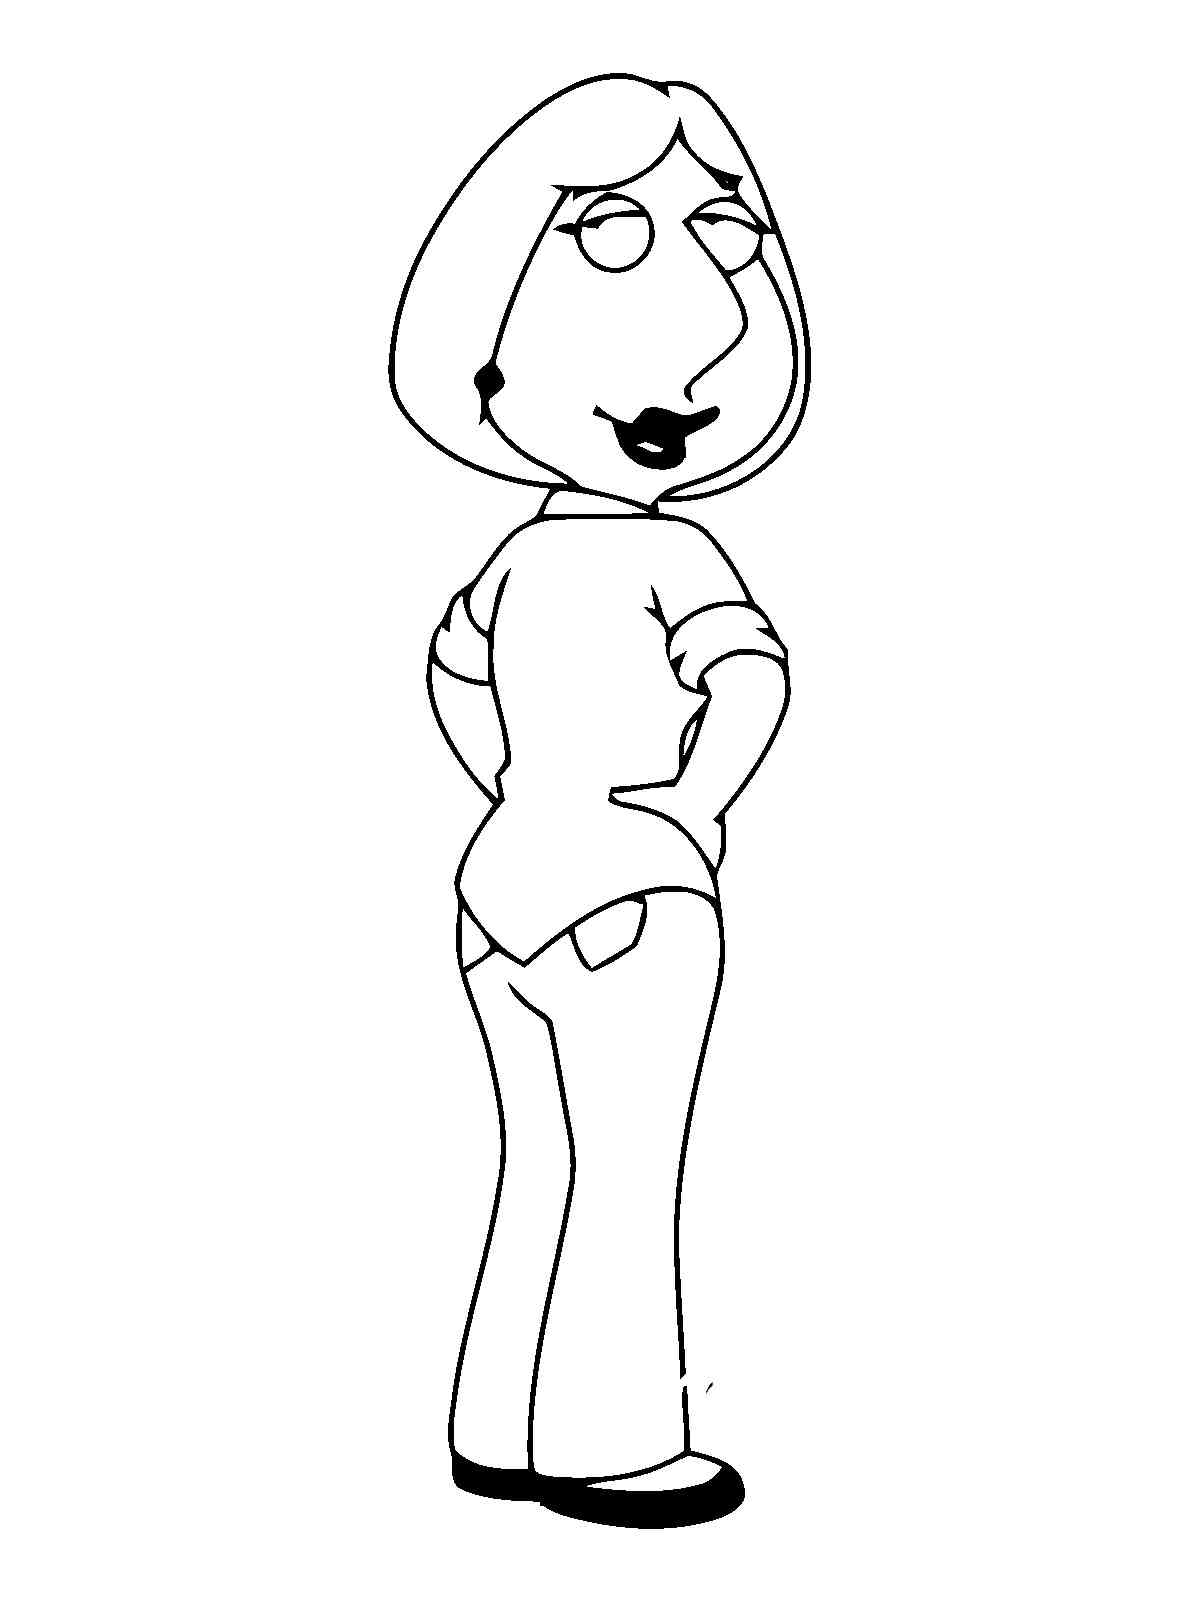 Family Guy 14 coloring page